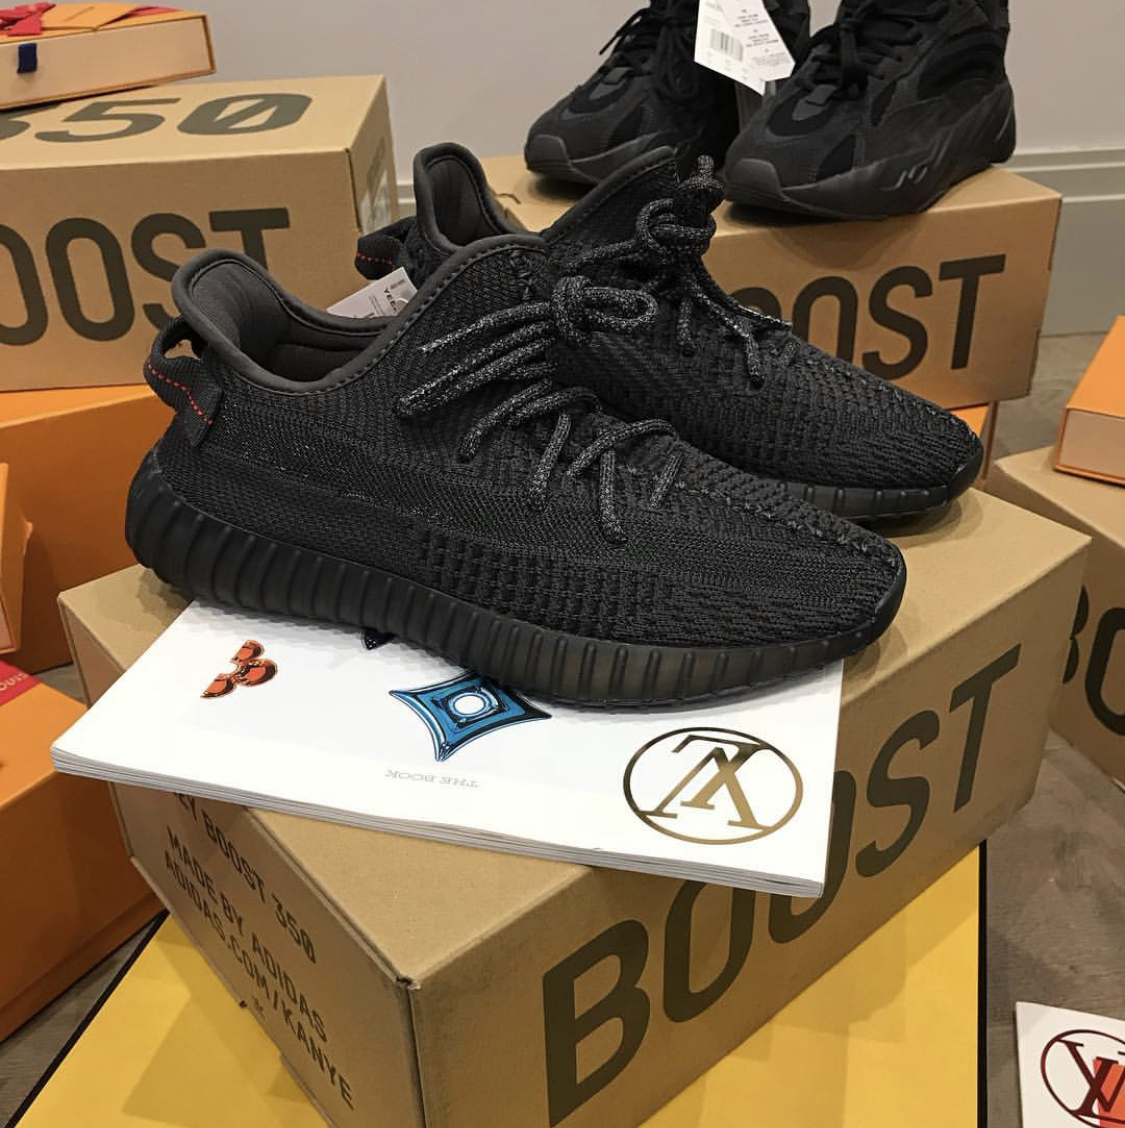 Cheap Adidas Yeezy Boost 350 V2 Light Gy3438 Menaposs Size 95 Pads